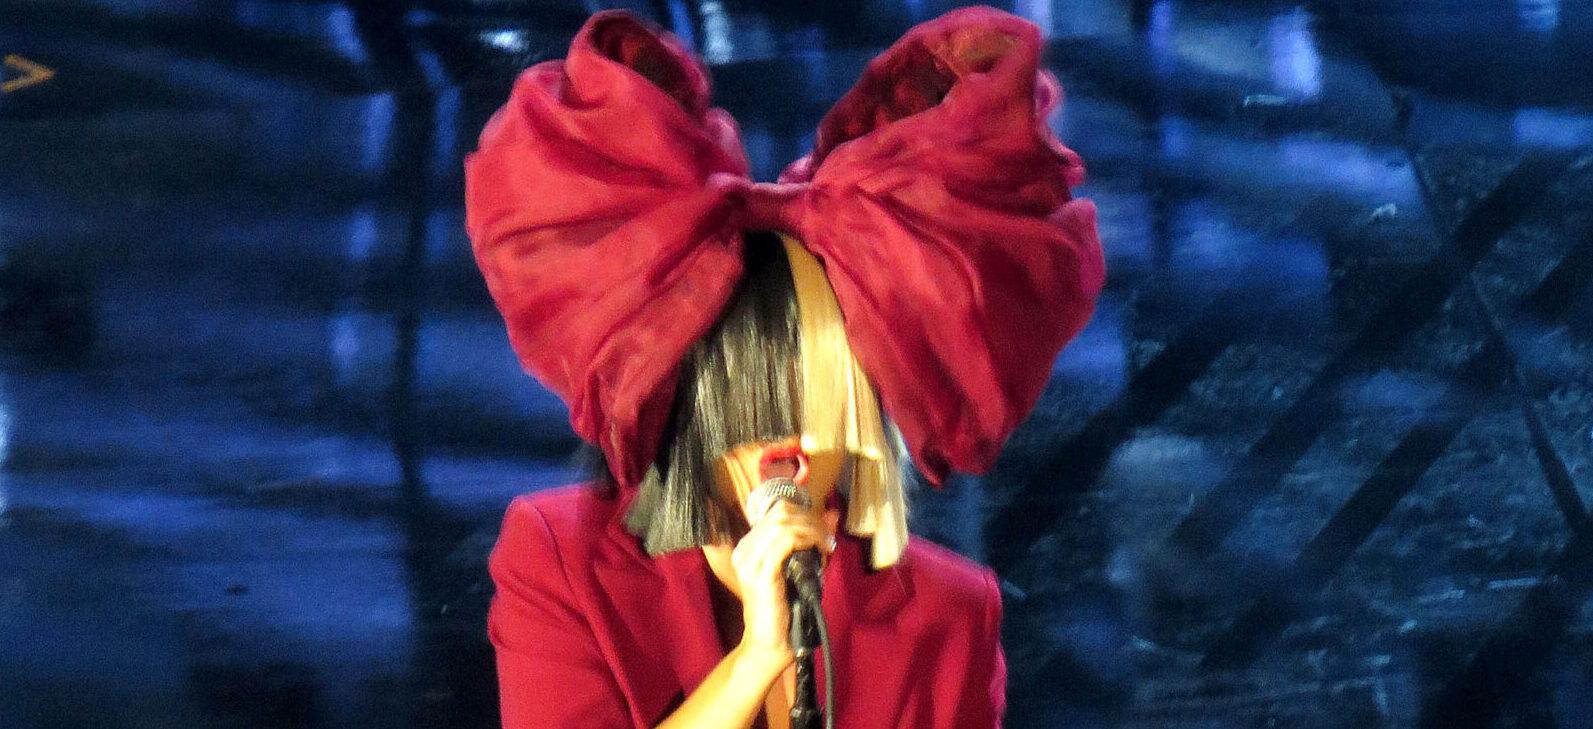 Sia Files For Legal Name Change To Match Husband